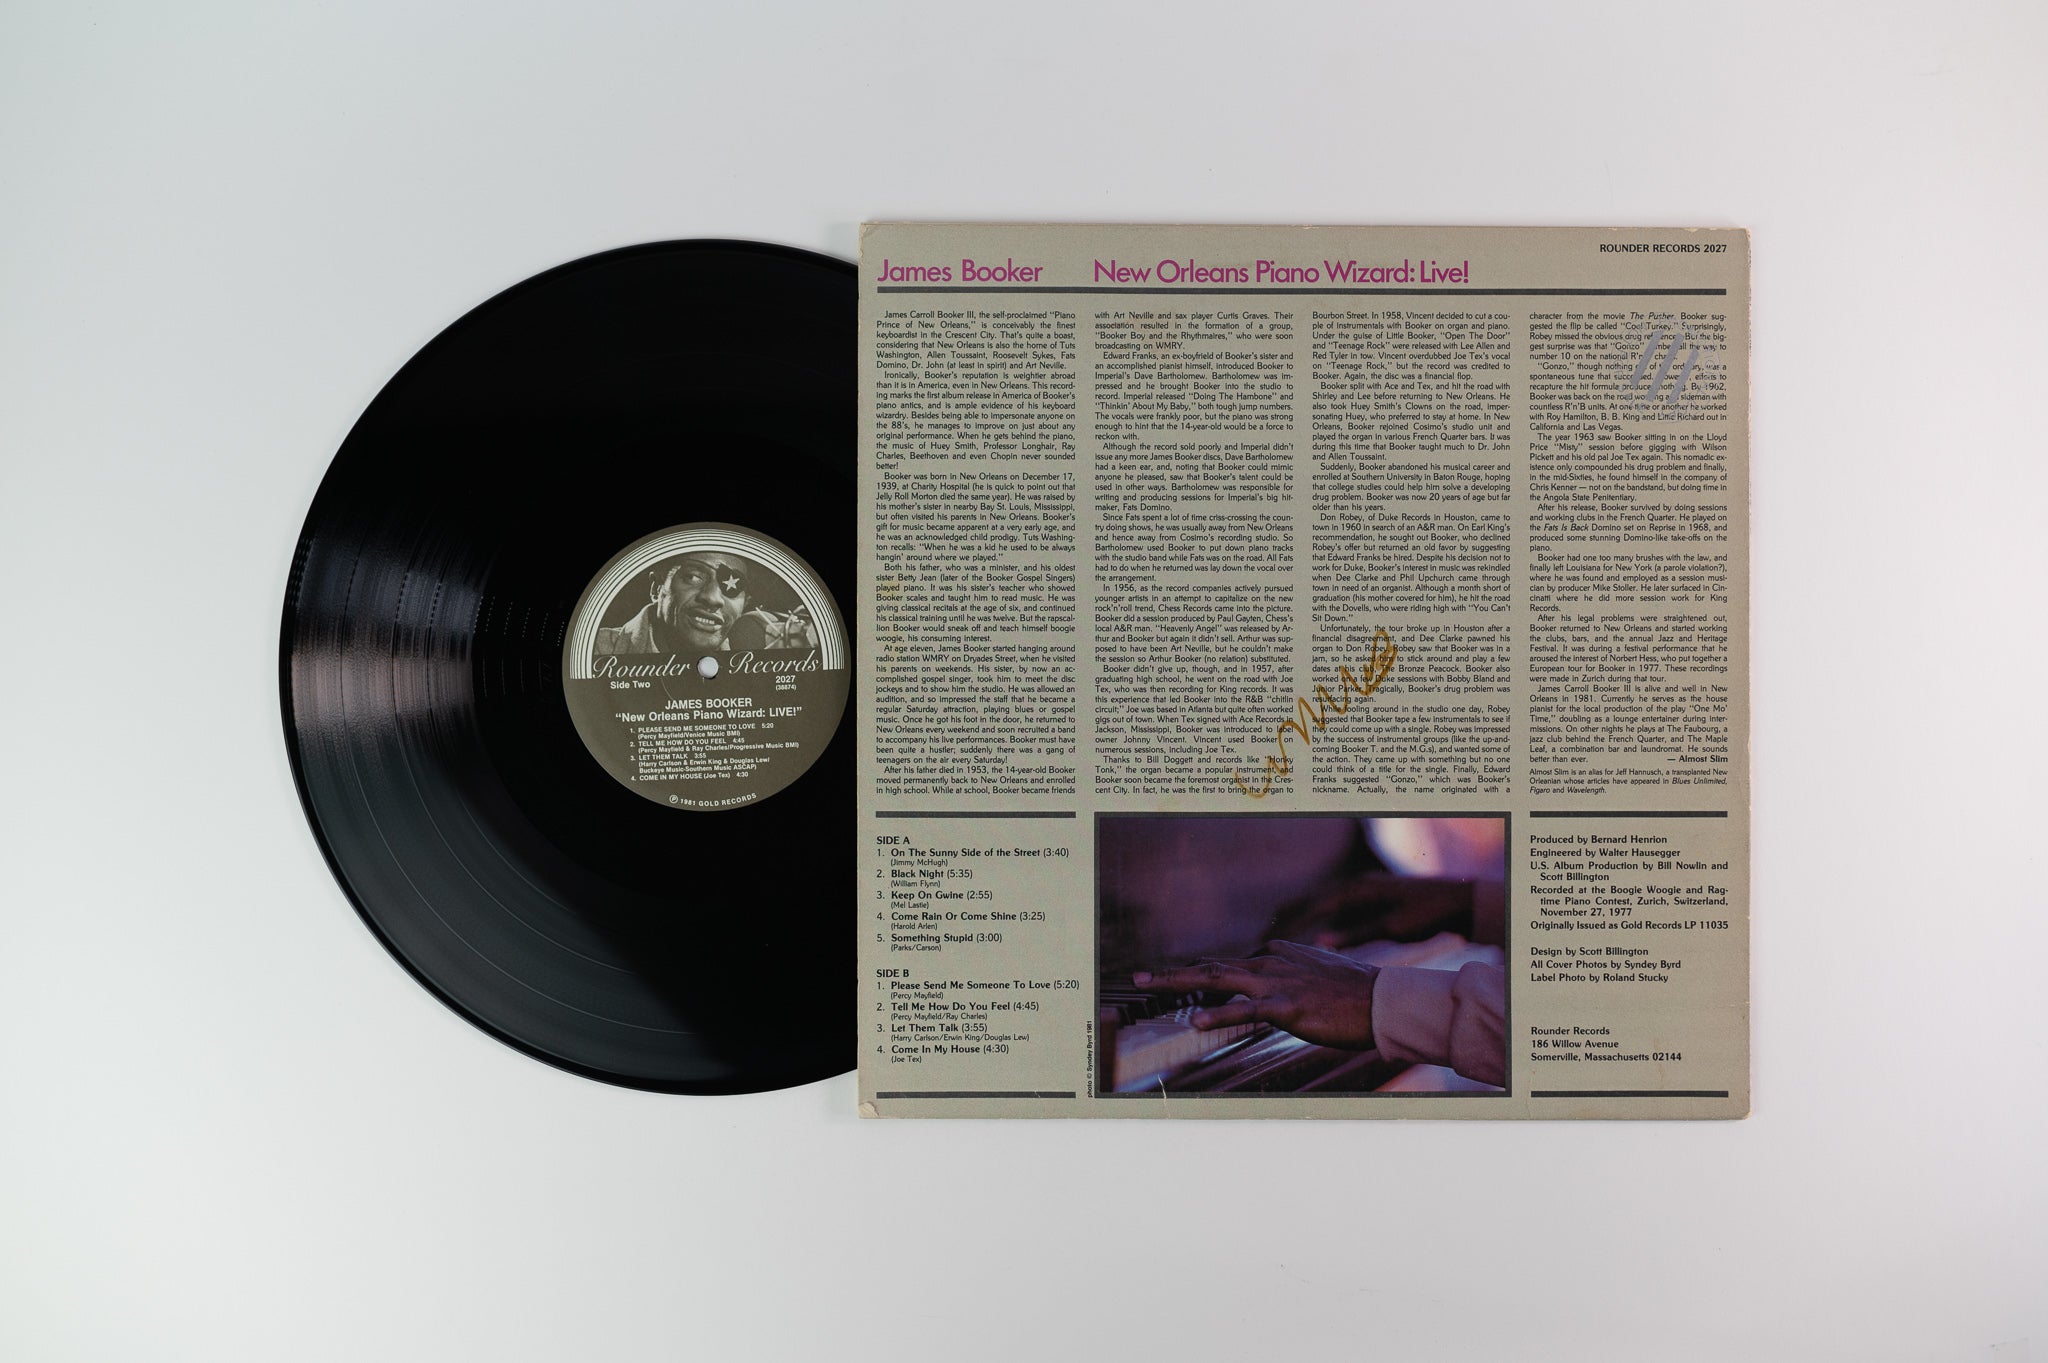 James Booker - New Orleans Piano Wizard: Live! on Rounder Reissue